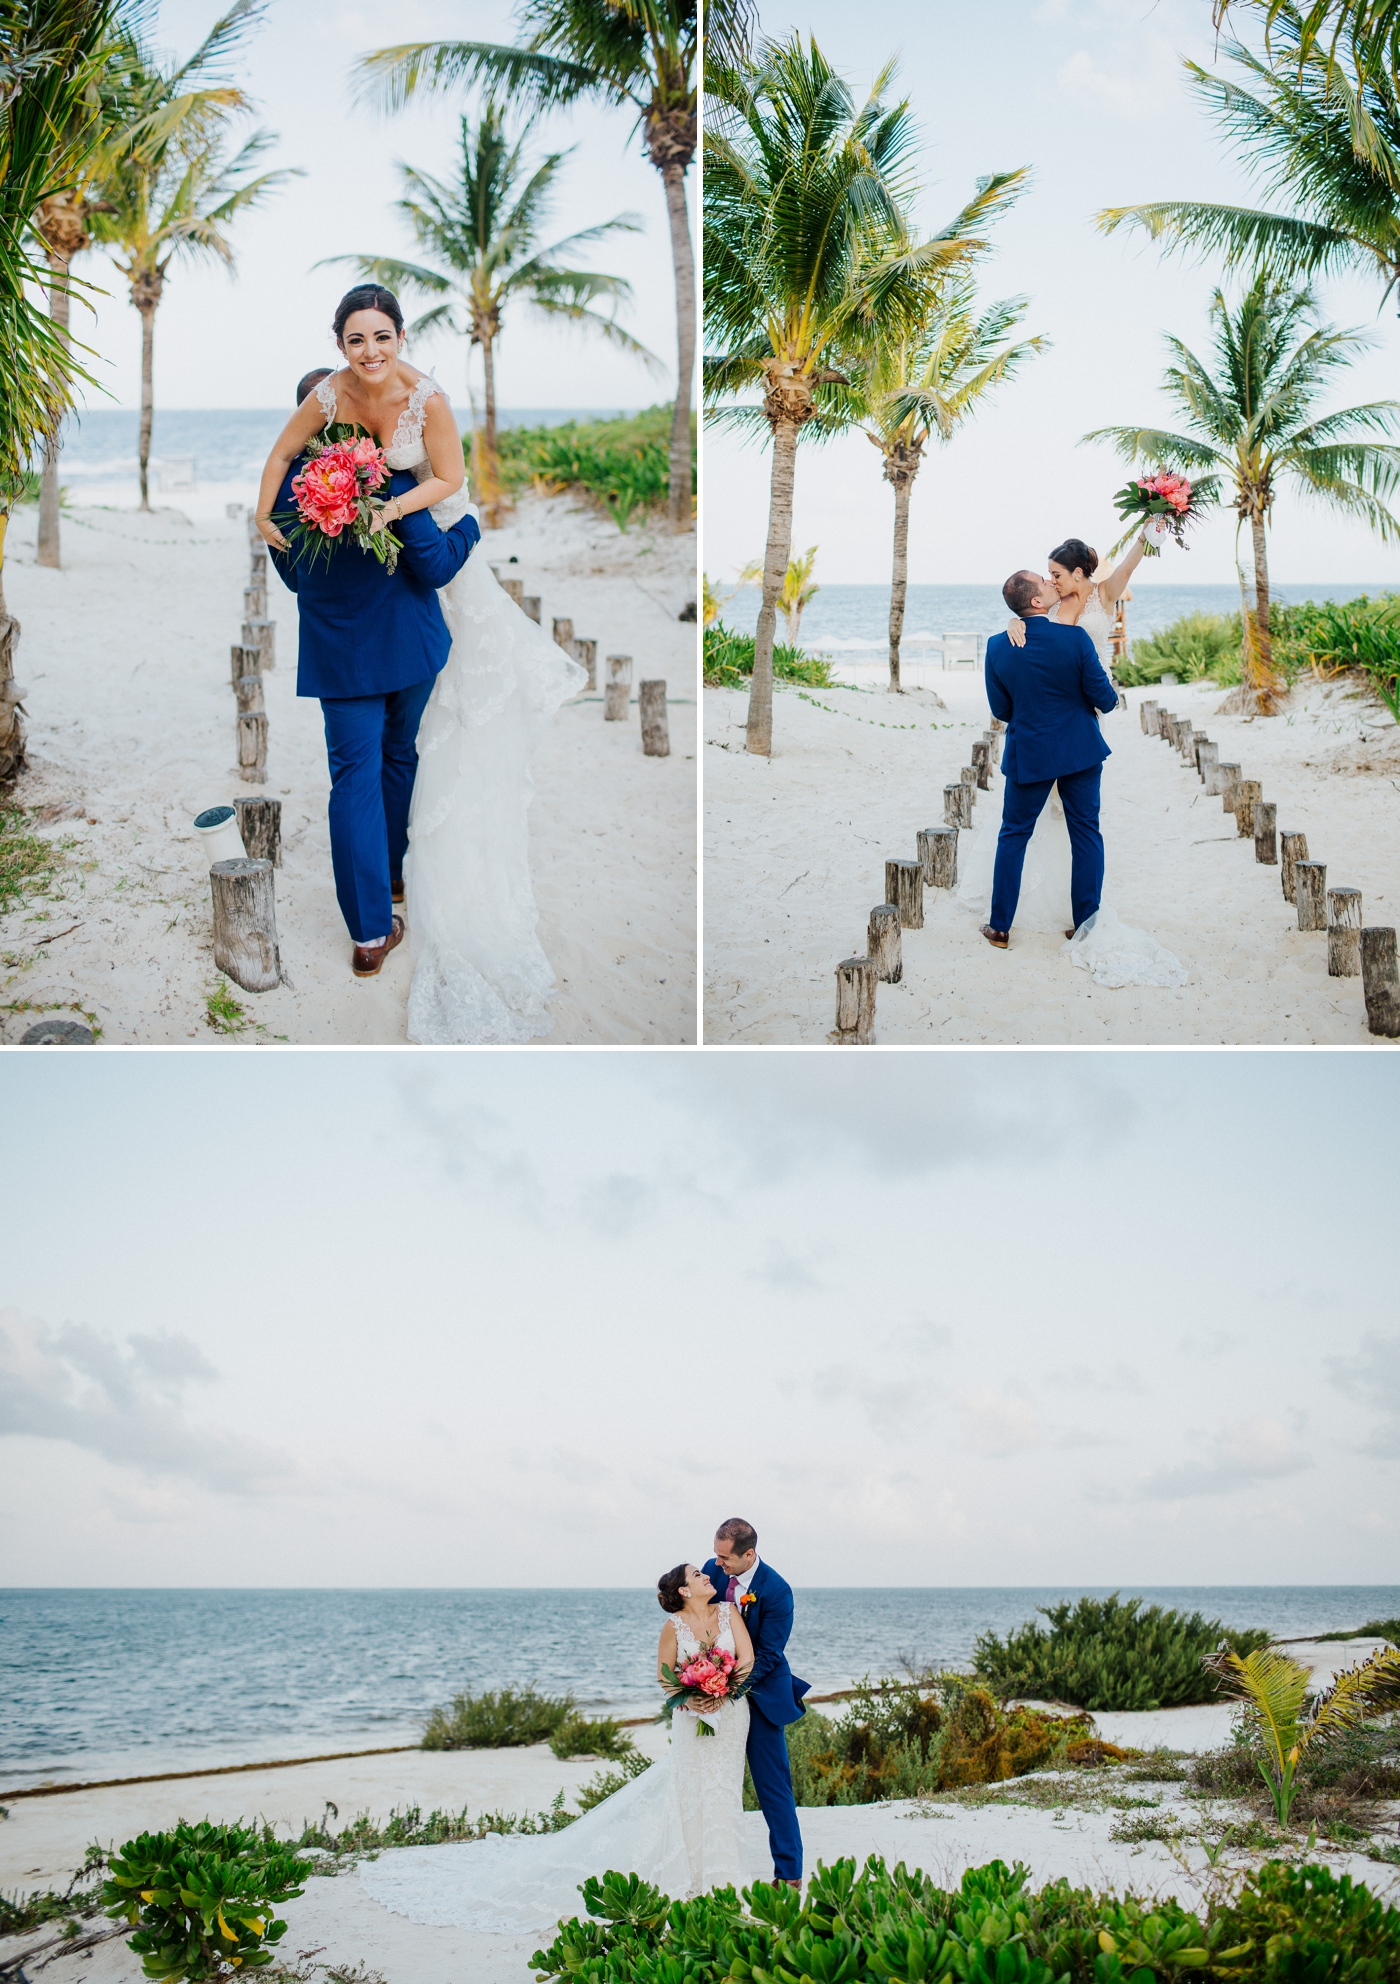 Destination wedding photography by Izzy + Co.